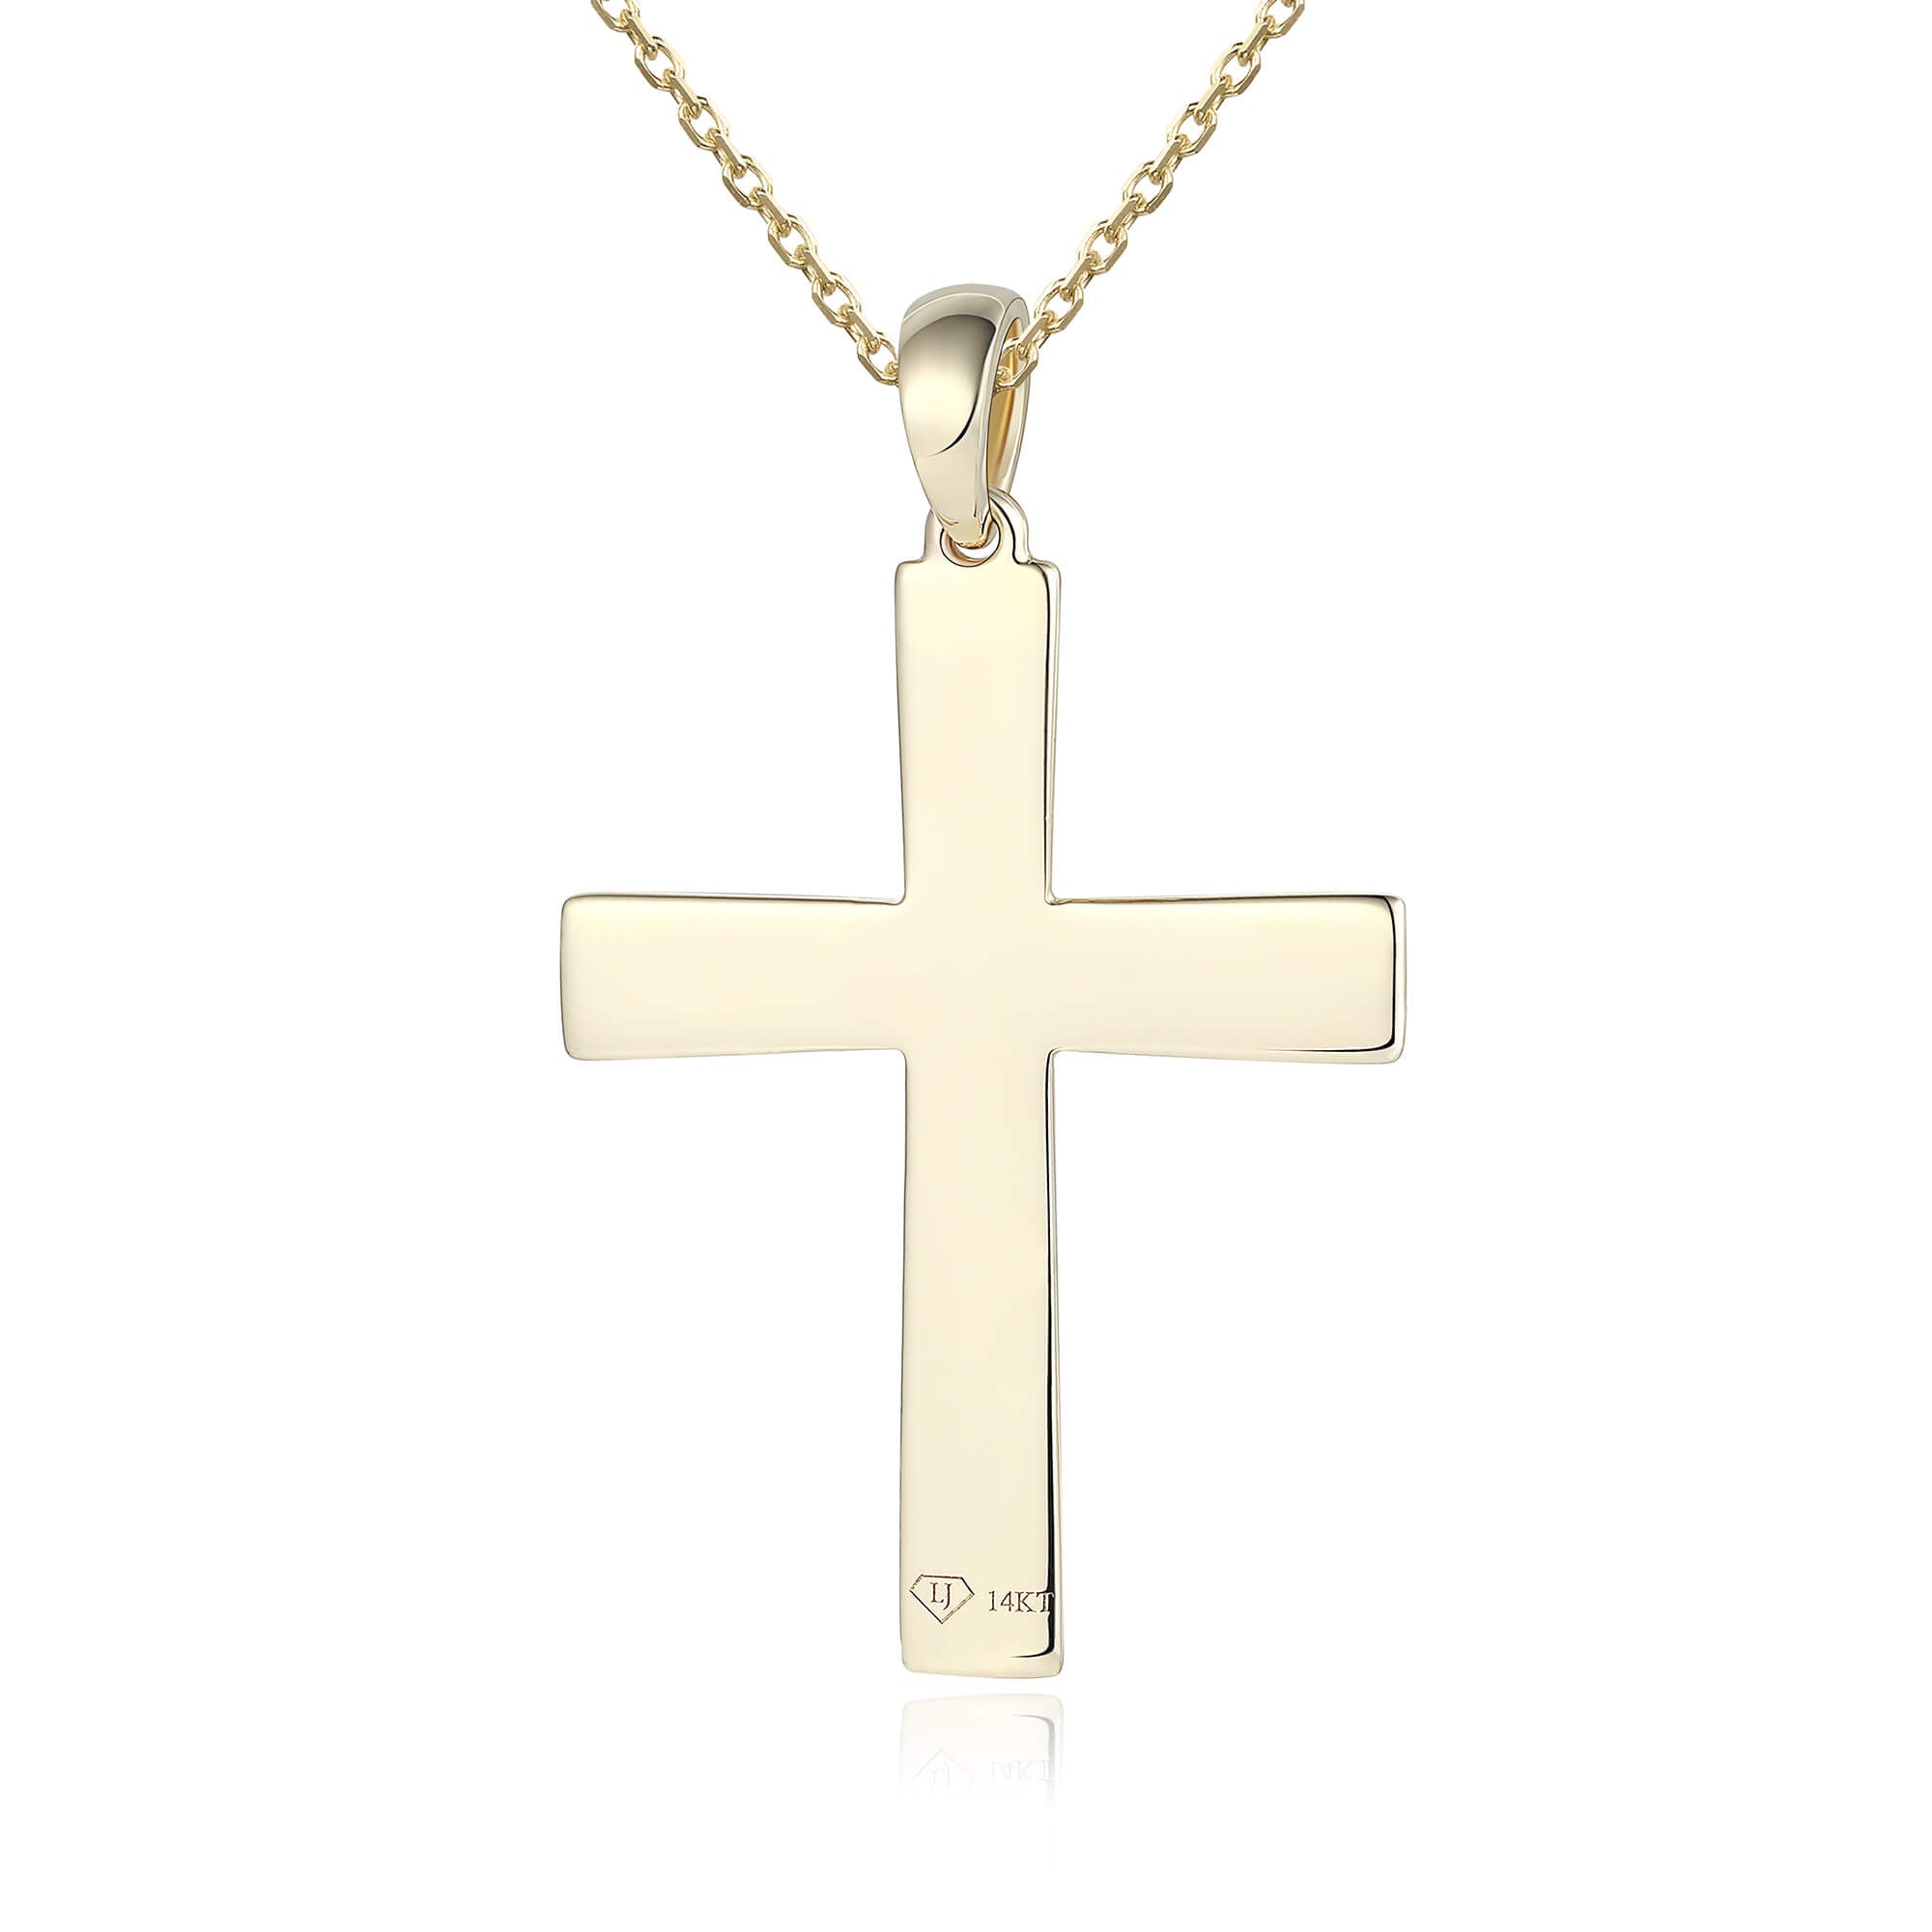 10x Small Cross Charms for Necklaces Religious Pendant Earring